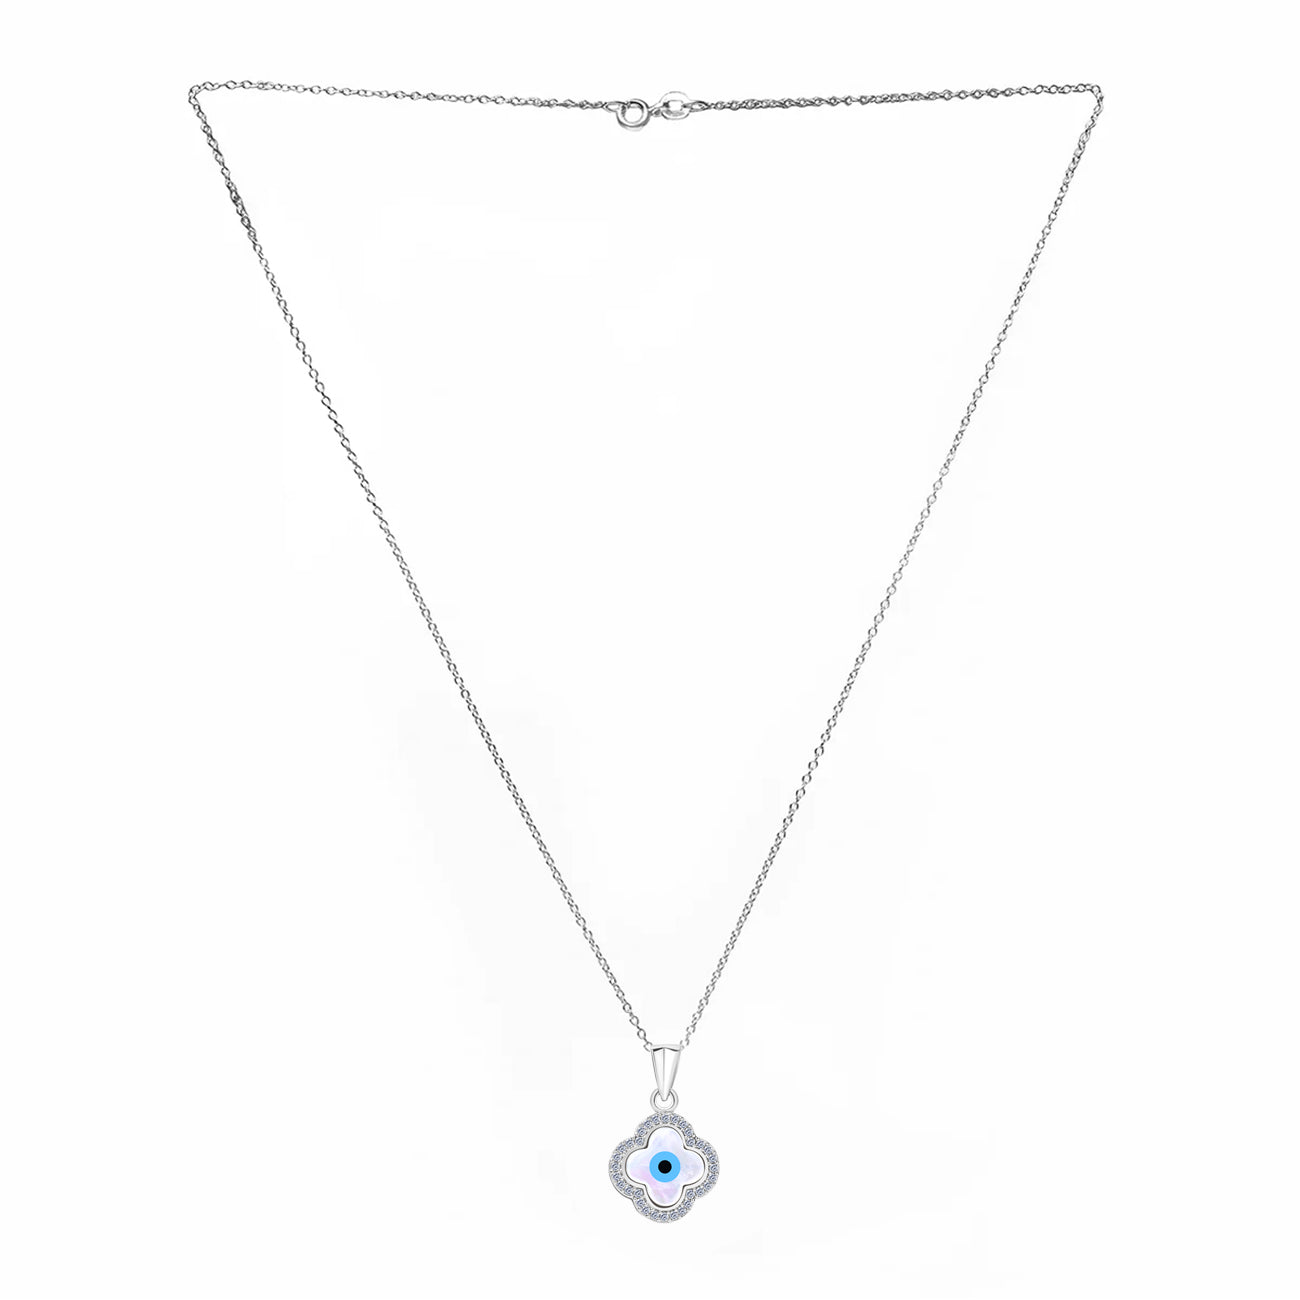 The blissful flower silver chain pendent